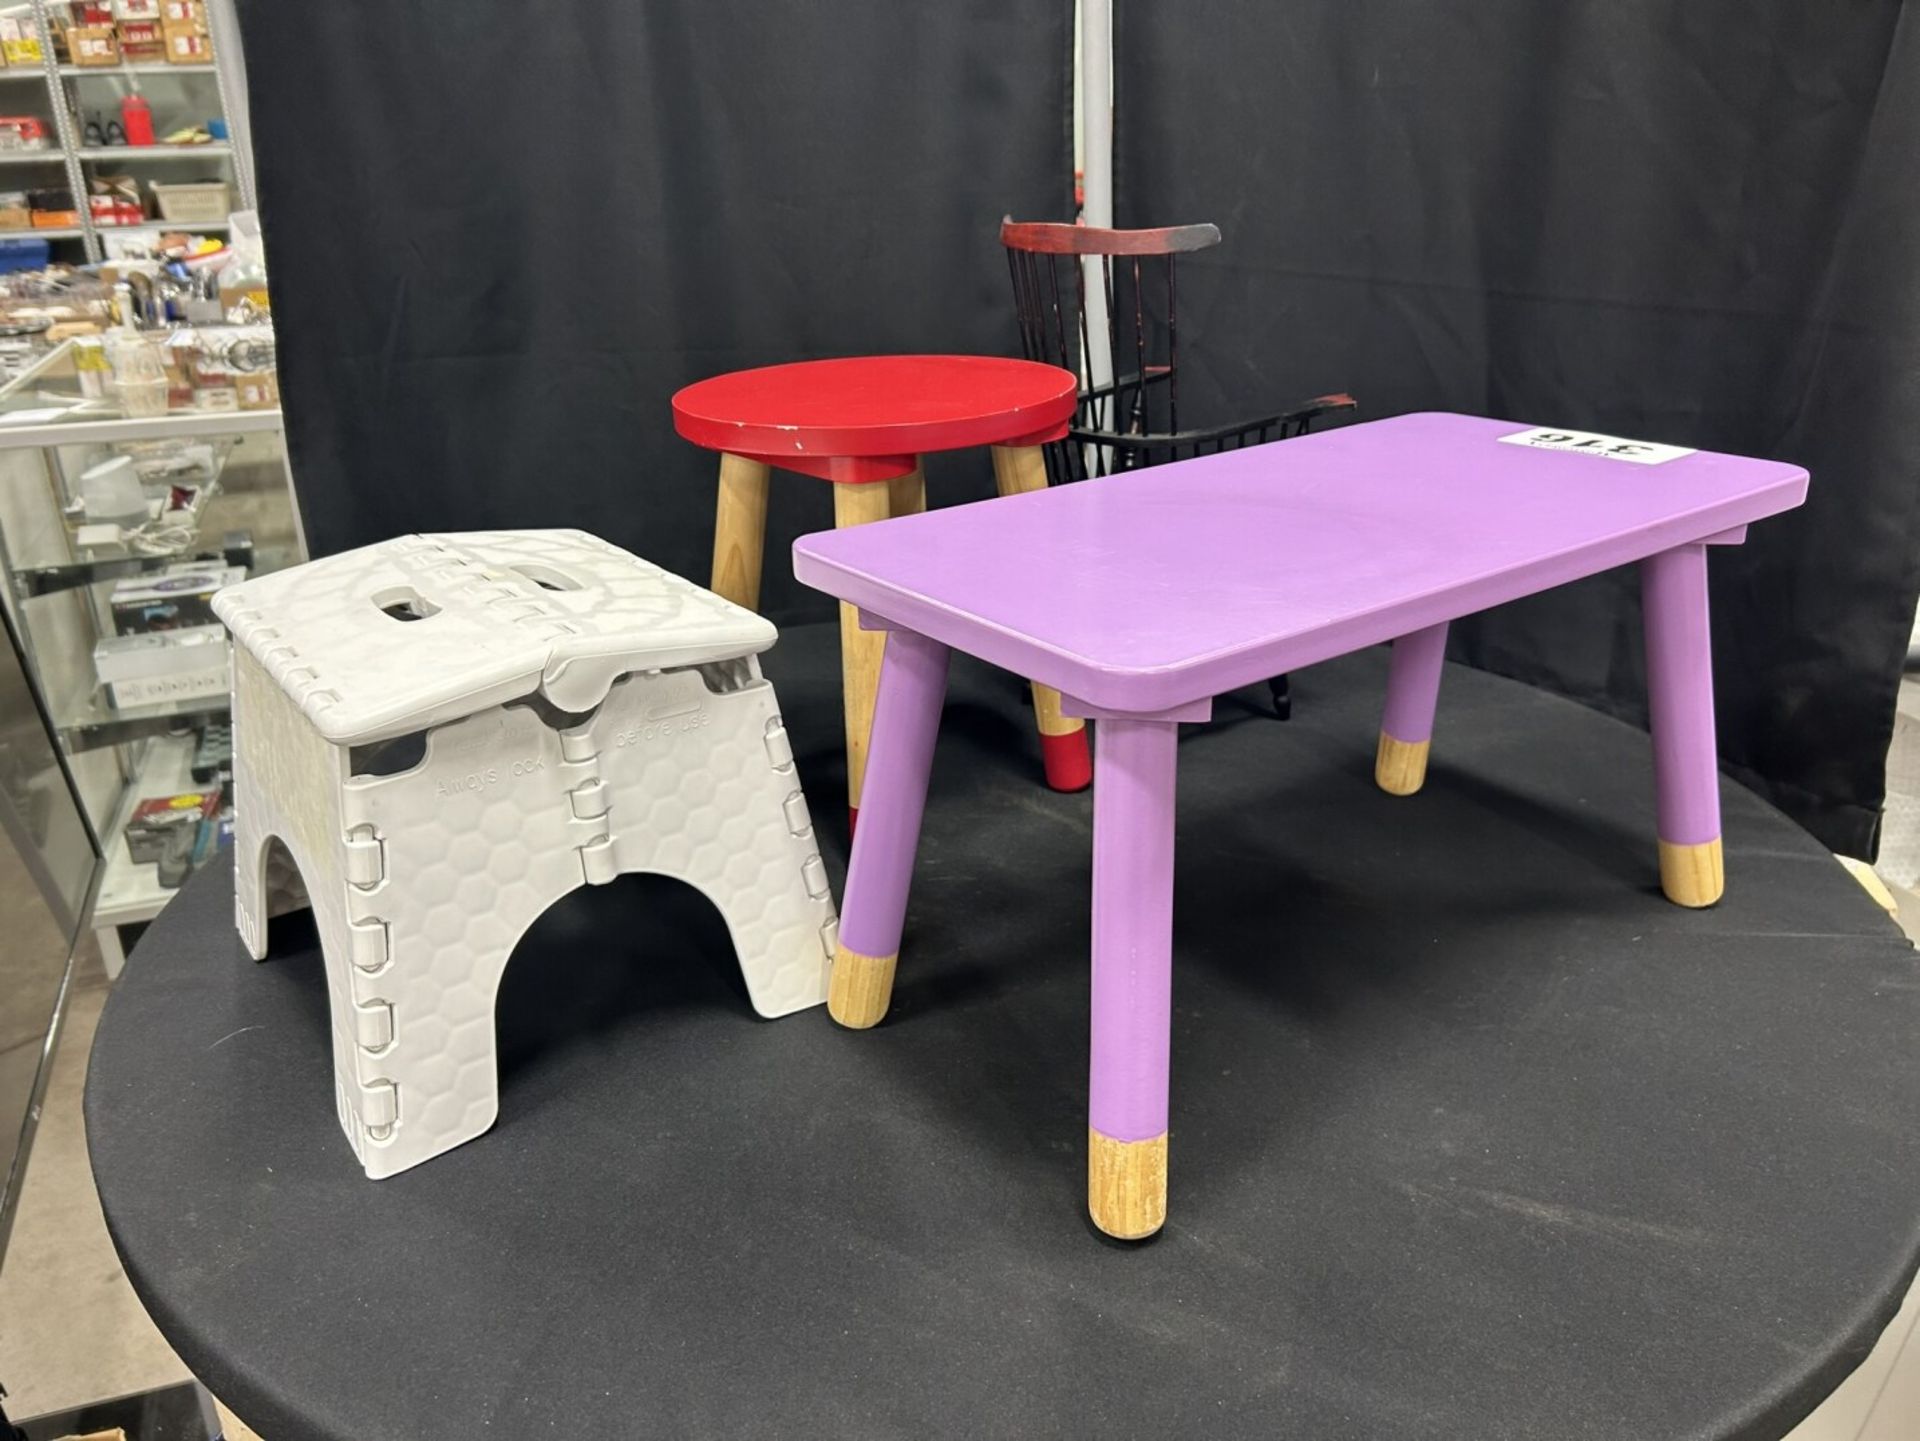 CHILDREN'S STOOL, BENCH, COLLAPSIBLE STOOL, DECORATIVE CHAIR - Image 3 of 4